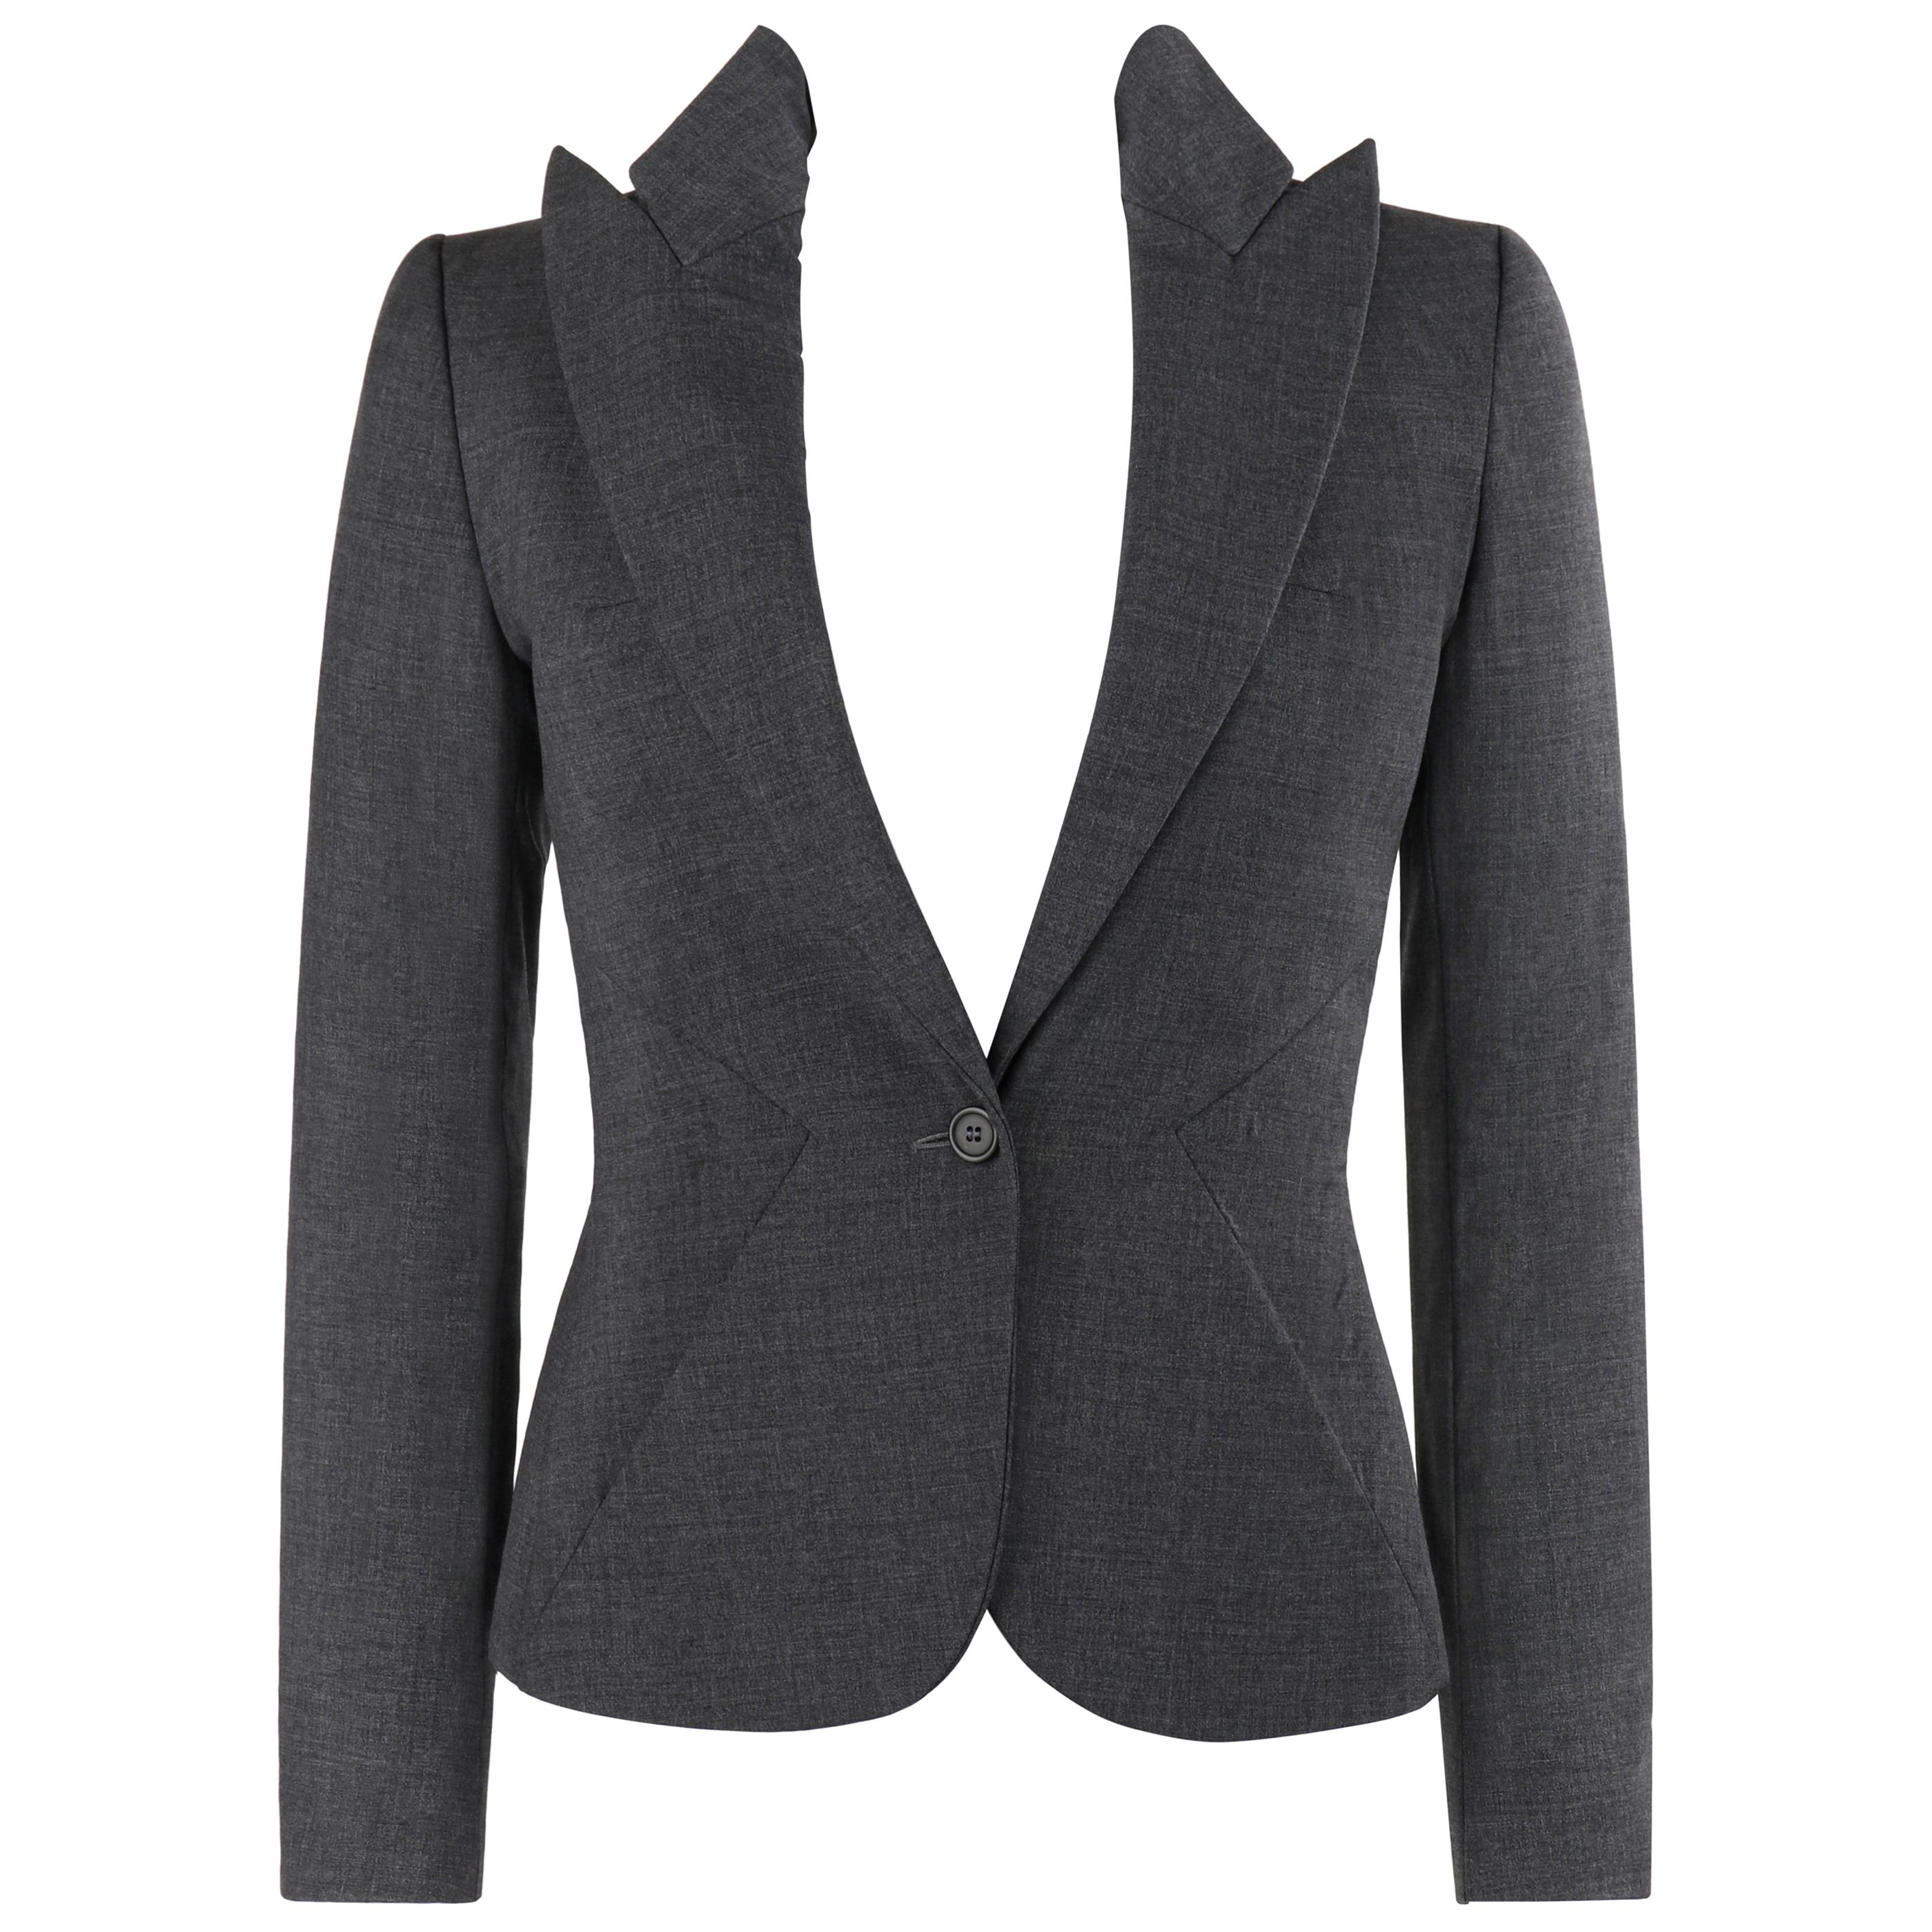 ALEXANDER McQUEEN S/S 1996 “The Hunger” Gray Tailored Long Sleeve Blazer Jacket For Sale